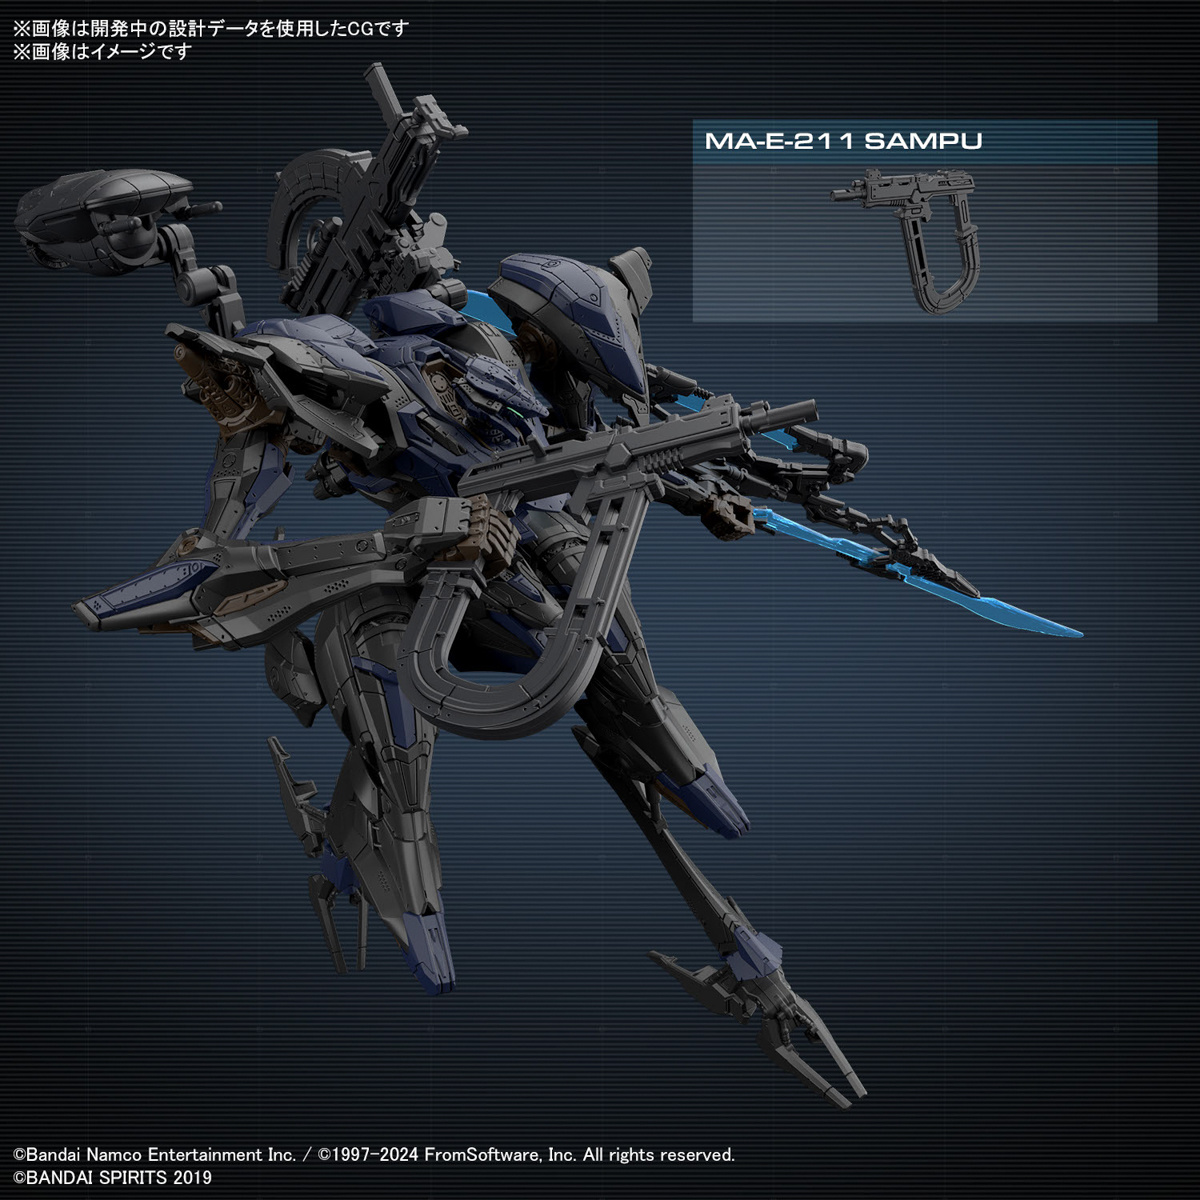 Wait, how did I miss that you can finally preorder Armored Core 6 model kits?